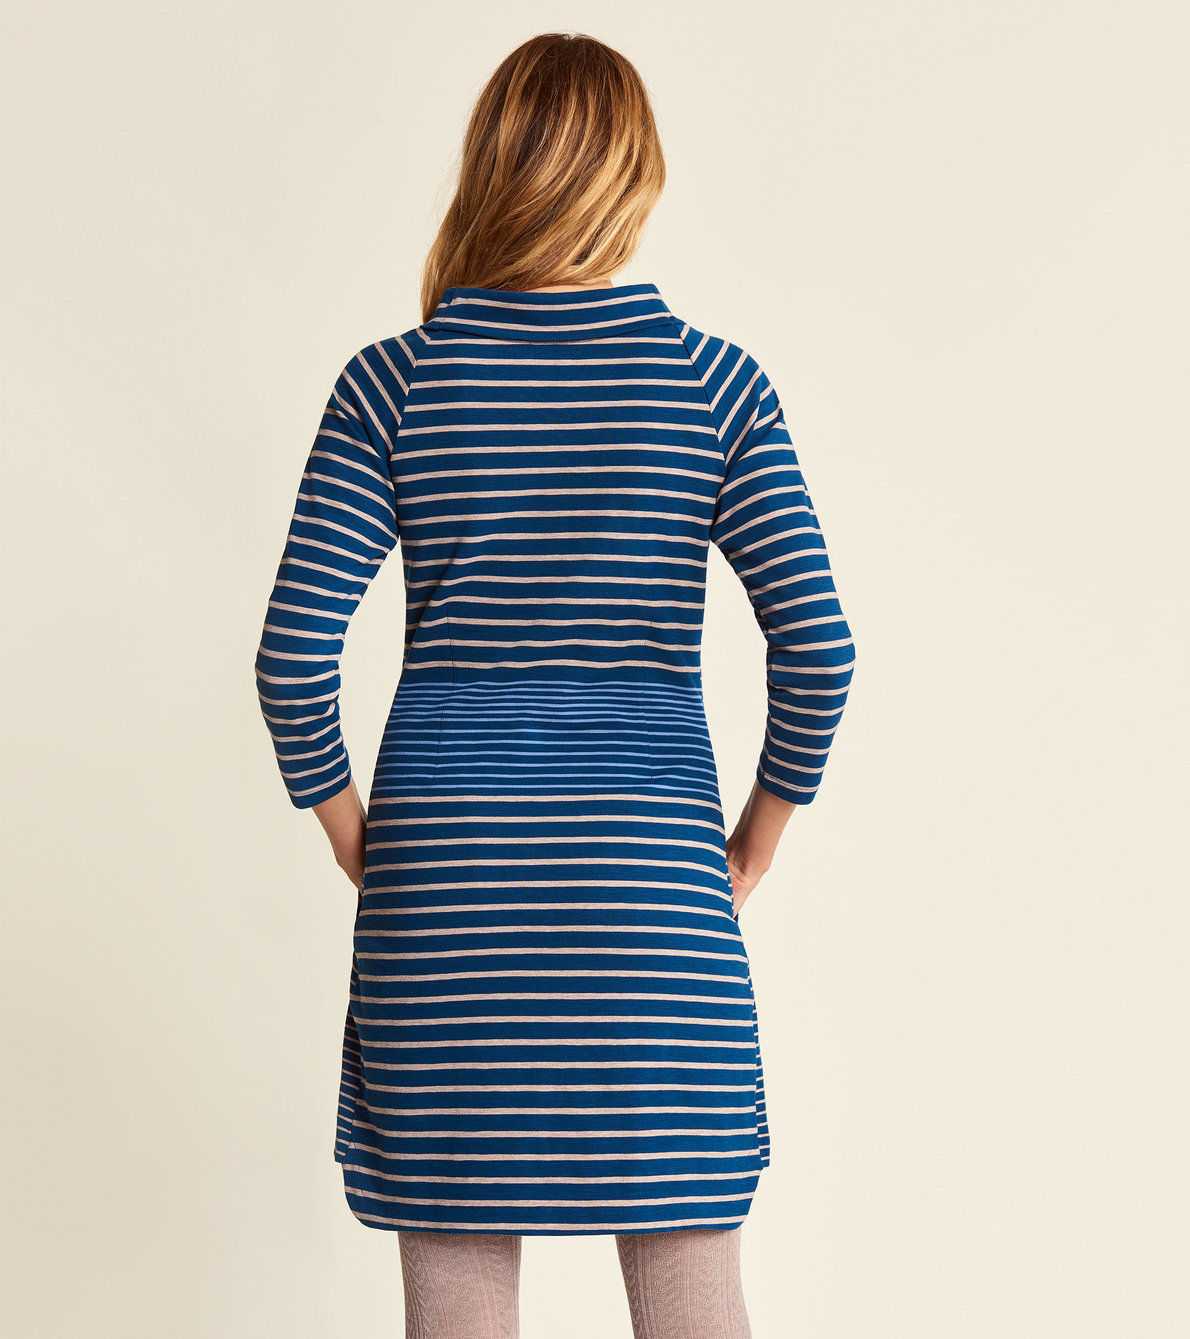 View larger image of Peggy Dress - Gradient Stripes